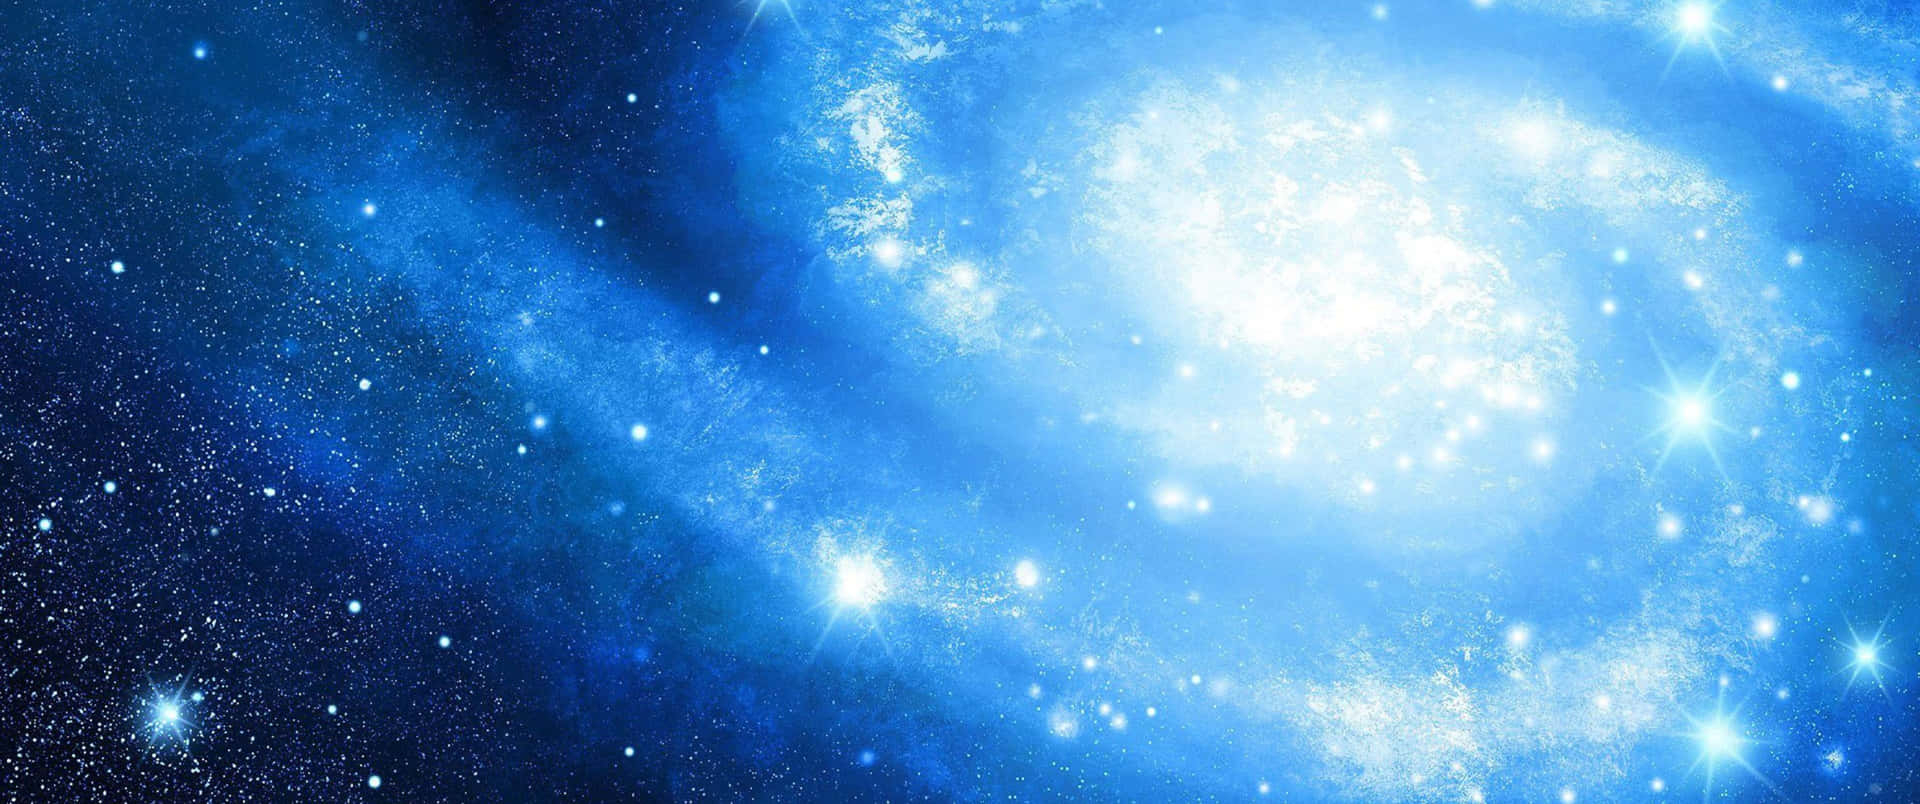 Blue Space Wallpapers  Wallpaper Cave